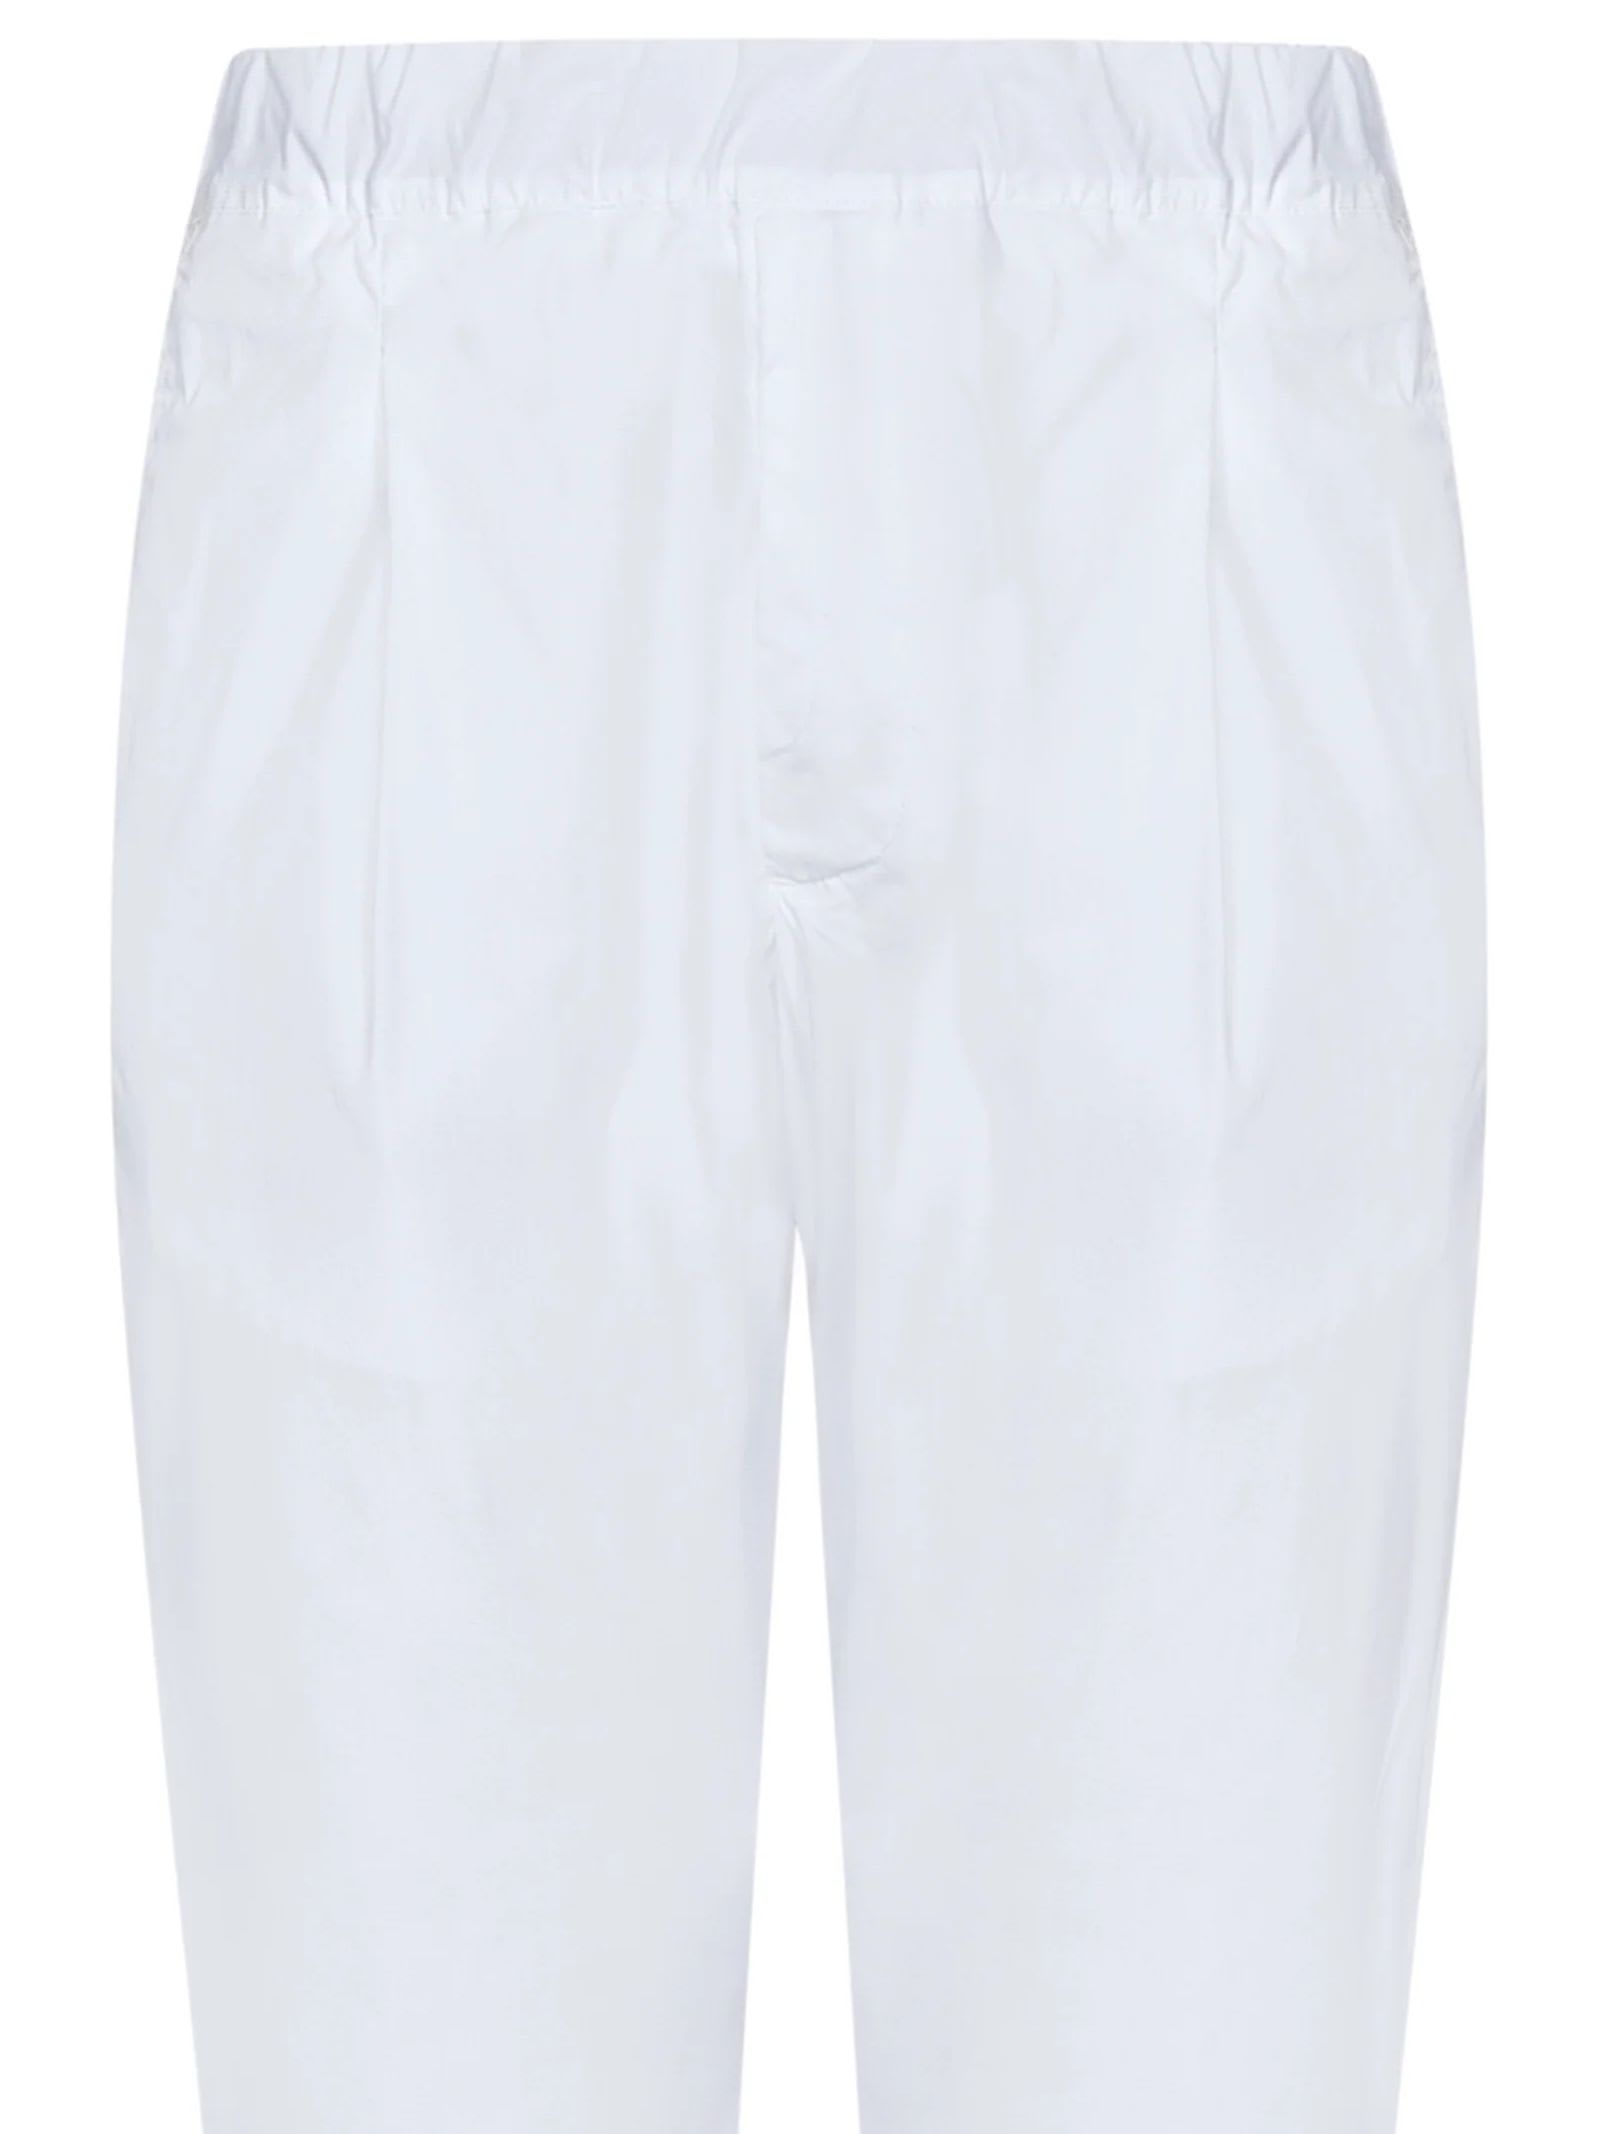 Shop Low Brand Trousers White